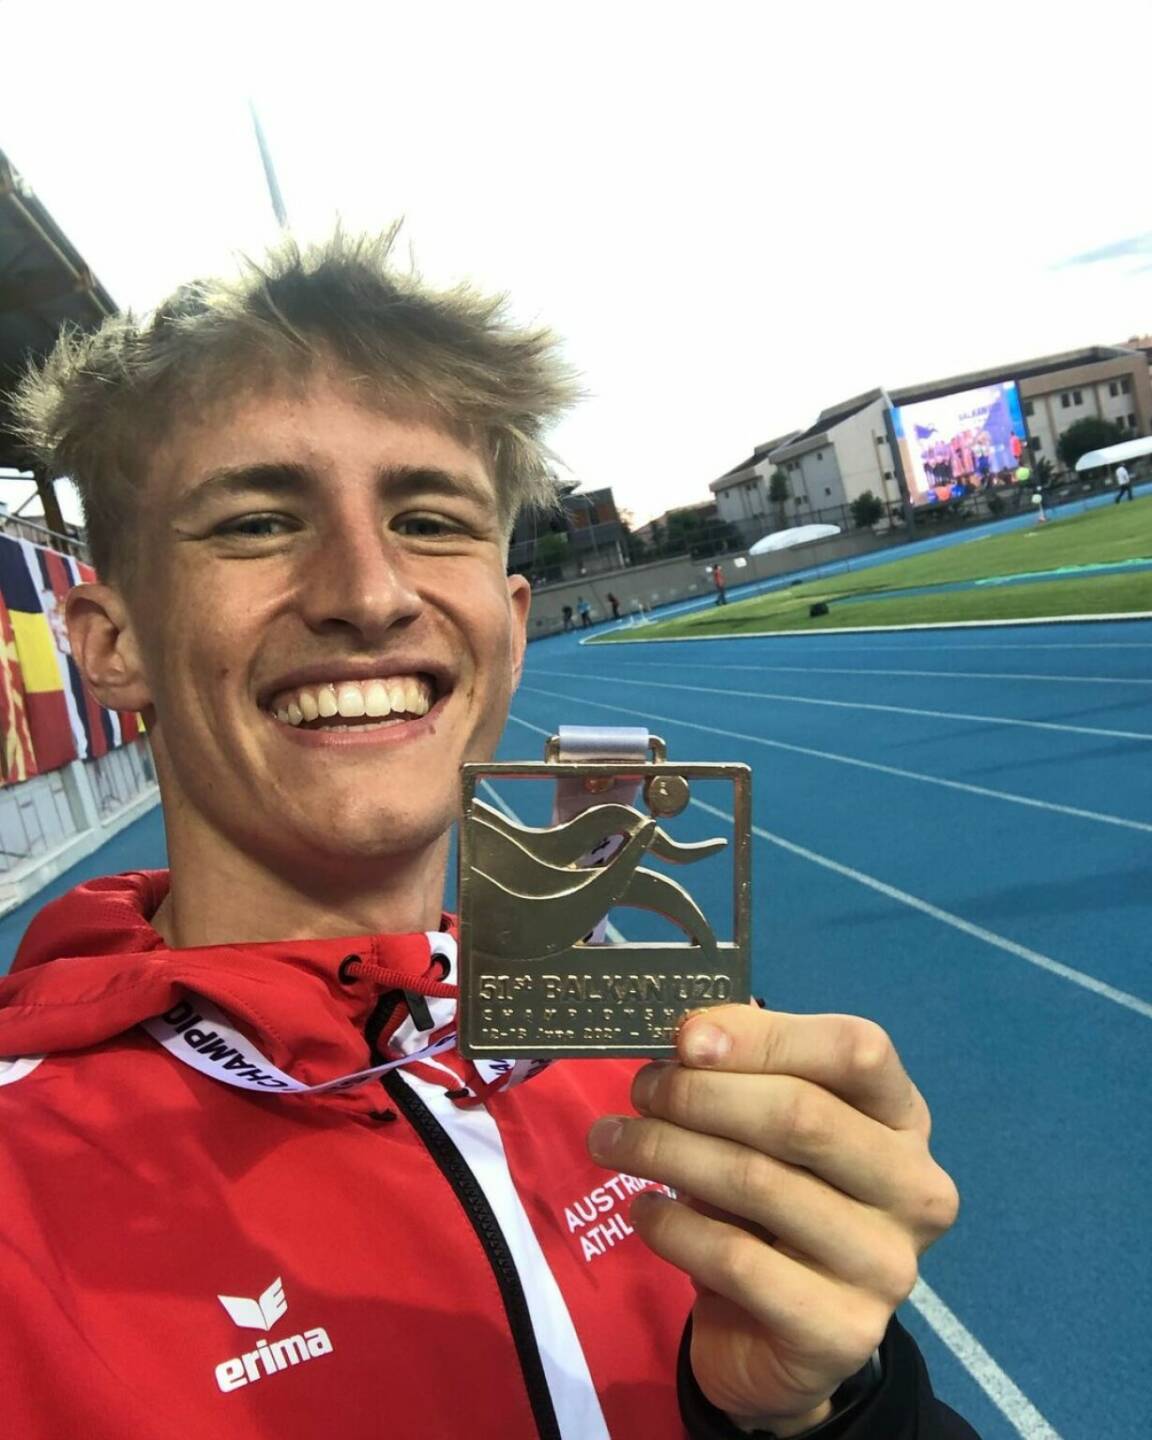 Sebastian Frey - Gold - Balkan Champion - rot-weiss-rot
GOLD!! I‘m BALKAN CHAMPION!! Won the U20 Balkan Championships over 3000m! 🏃🏼‍♂️😄🔥🔥
.
Super happy with my race - it was very slow & tactical in the beginning but managed to come through with the WIN! ✌🏼😄🔥
.
#win #champion #balkan #balkanchampion #istanbul #competition #race #winner #gold #goldmedal #balkanathletics #turkey @polardach @polarglobal #vantagev2 @saysky #saysky 
(Von: https://www.instagram.com/p/CQEf8m_nMgw/ , Sebastian Frey